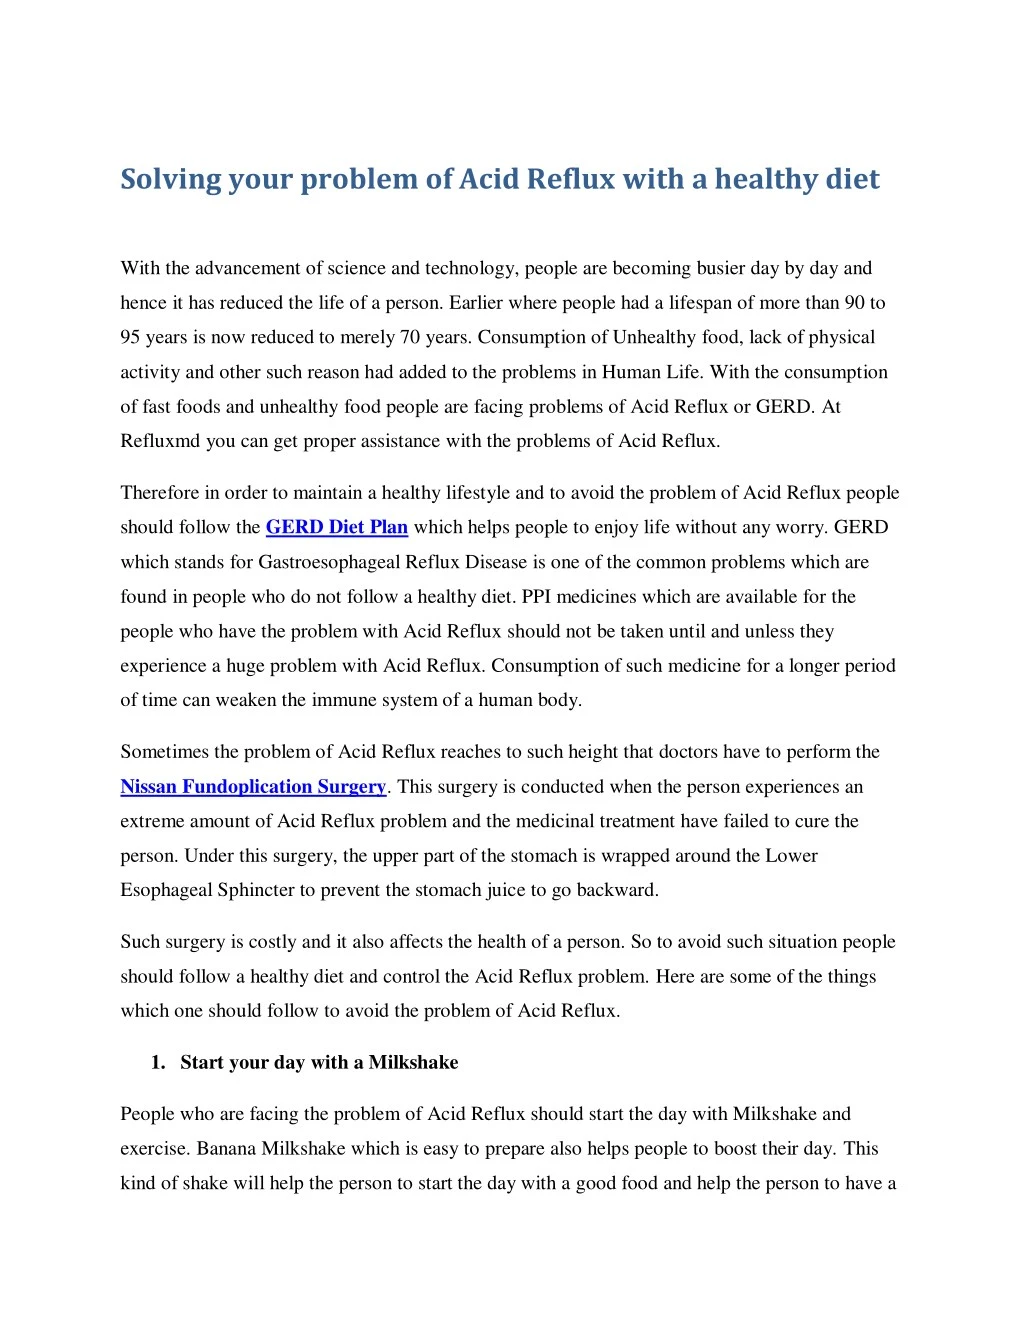 solving your problem of acid reflux with